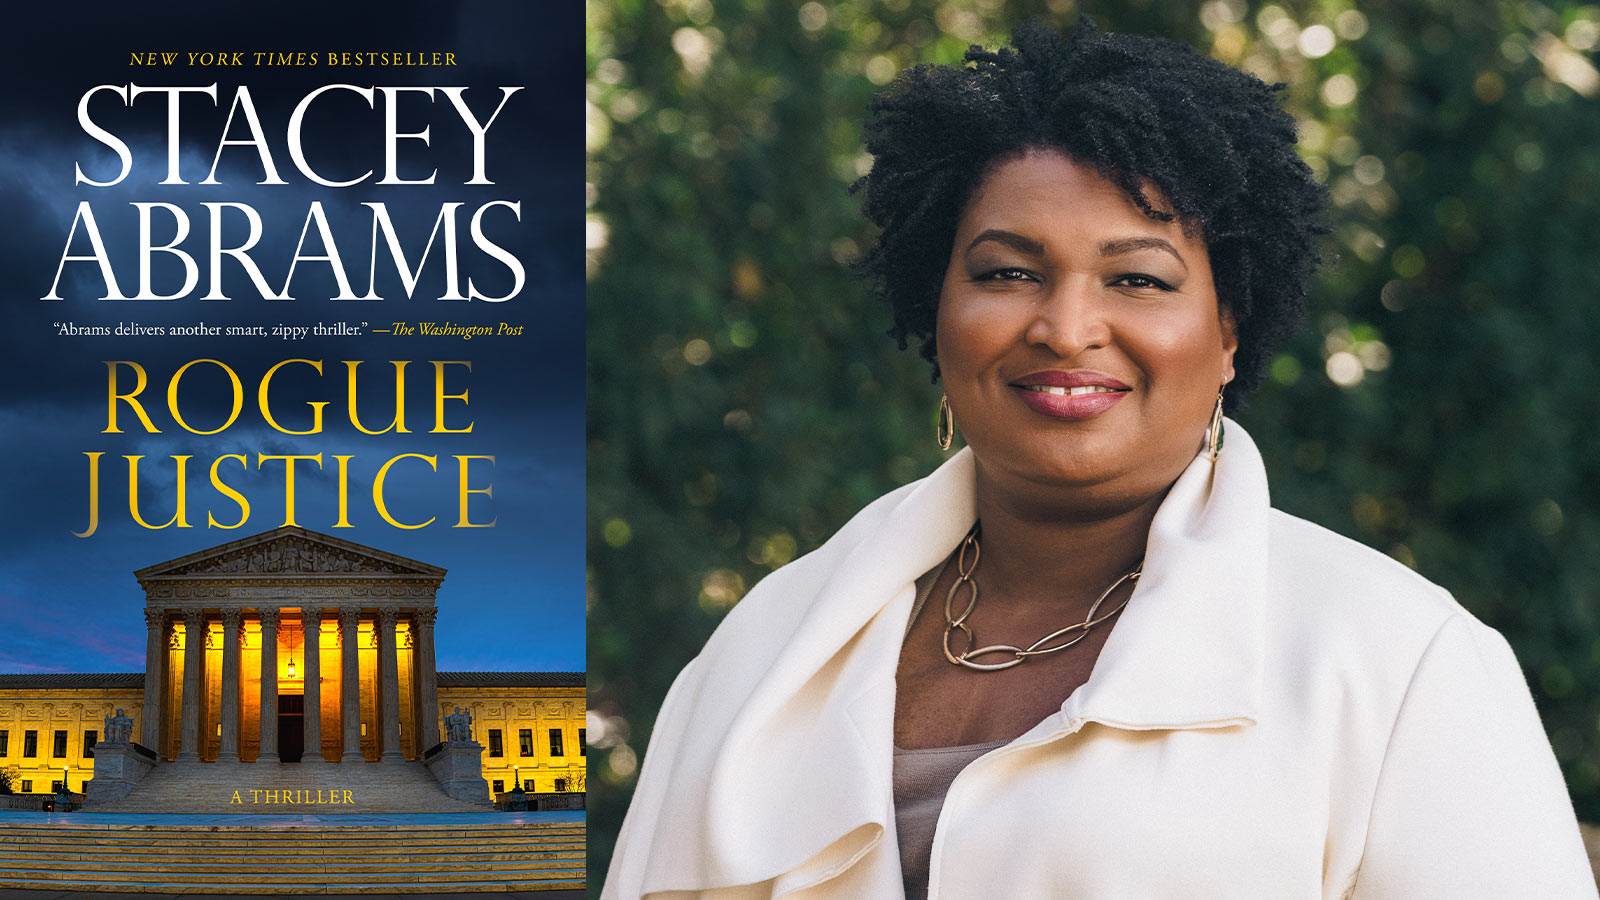 A compiste image - On the left is Stacey Abrams' book. The cover has the title "Rogue Justice" above a lit capital building against a dark blue background. On the right is the author, wearing a white jacket. She is standing against a lush green background. The author has short brown hair and is looking at the camera.